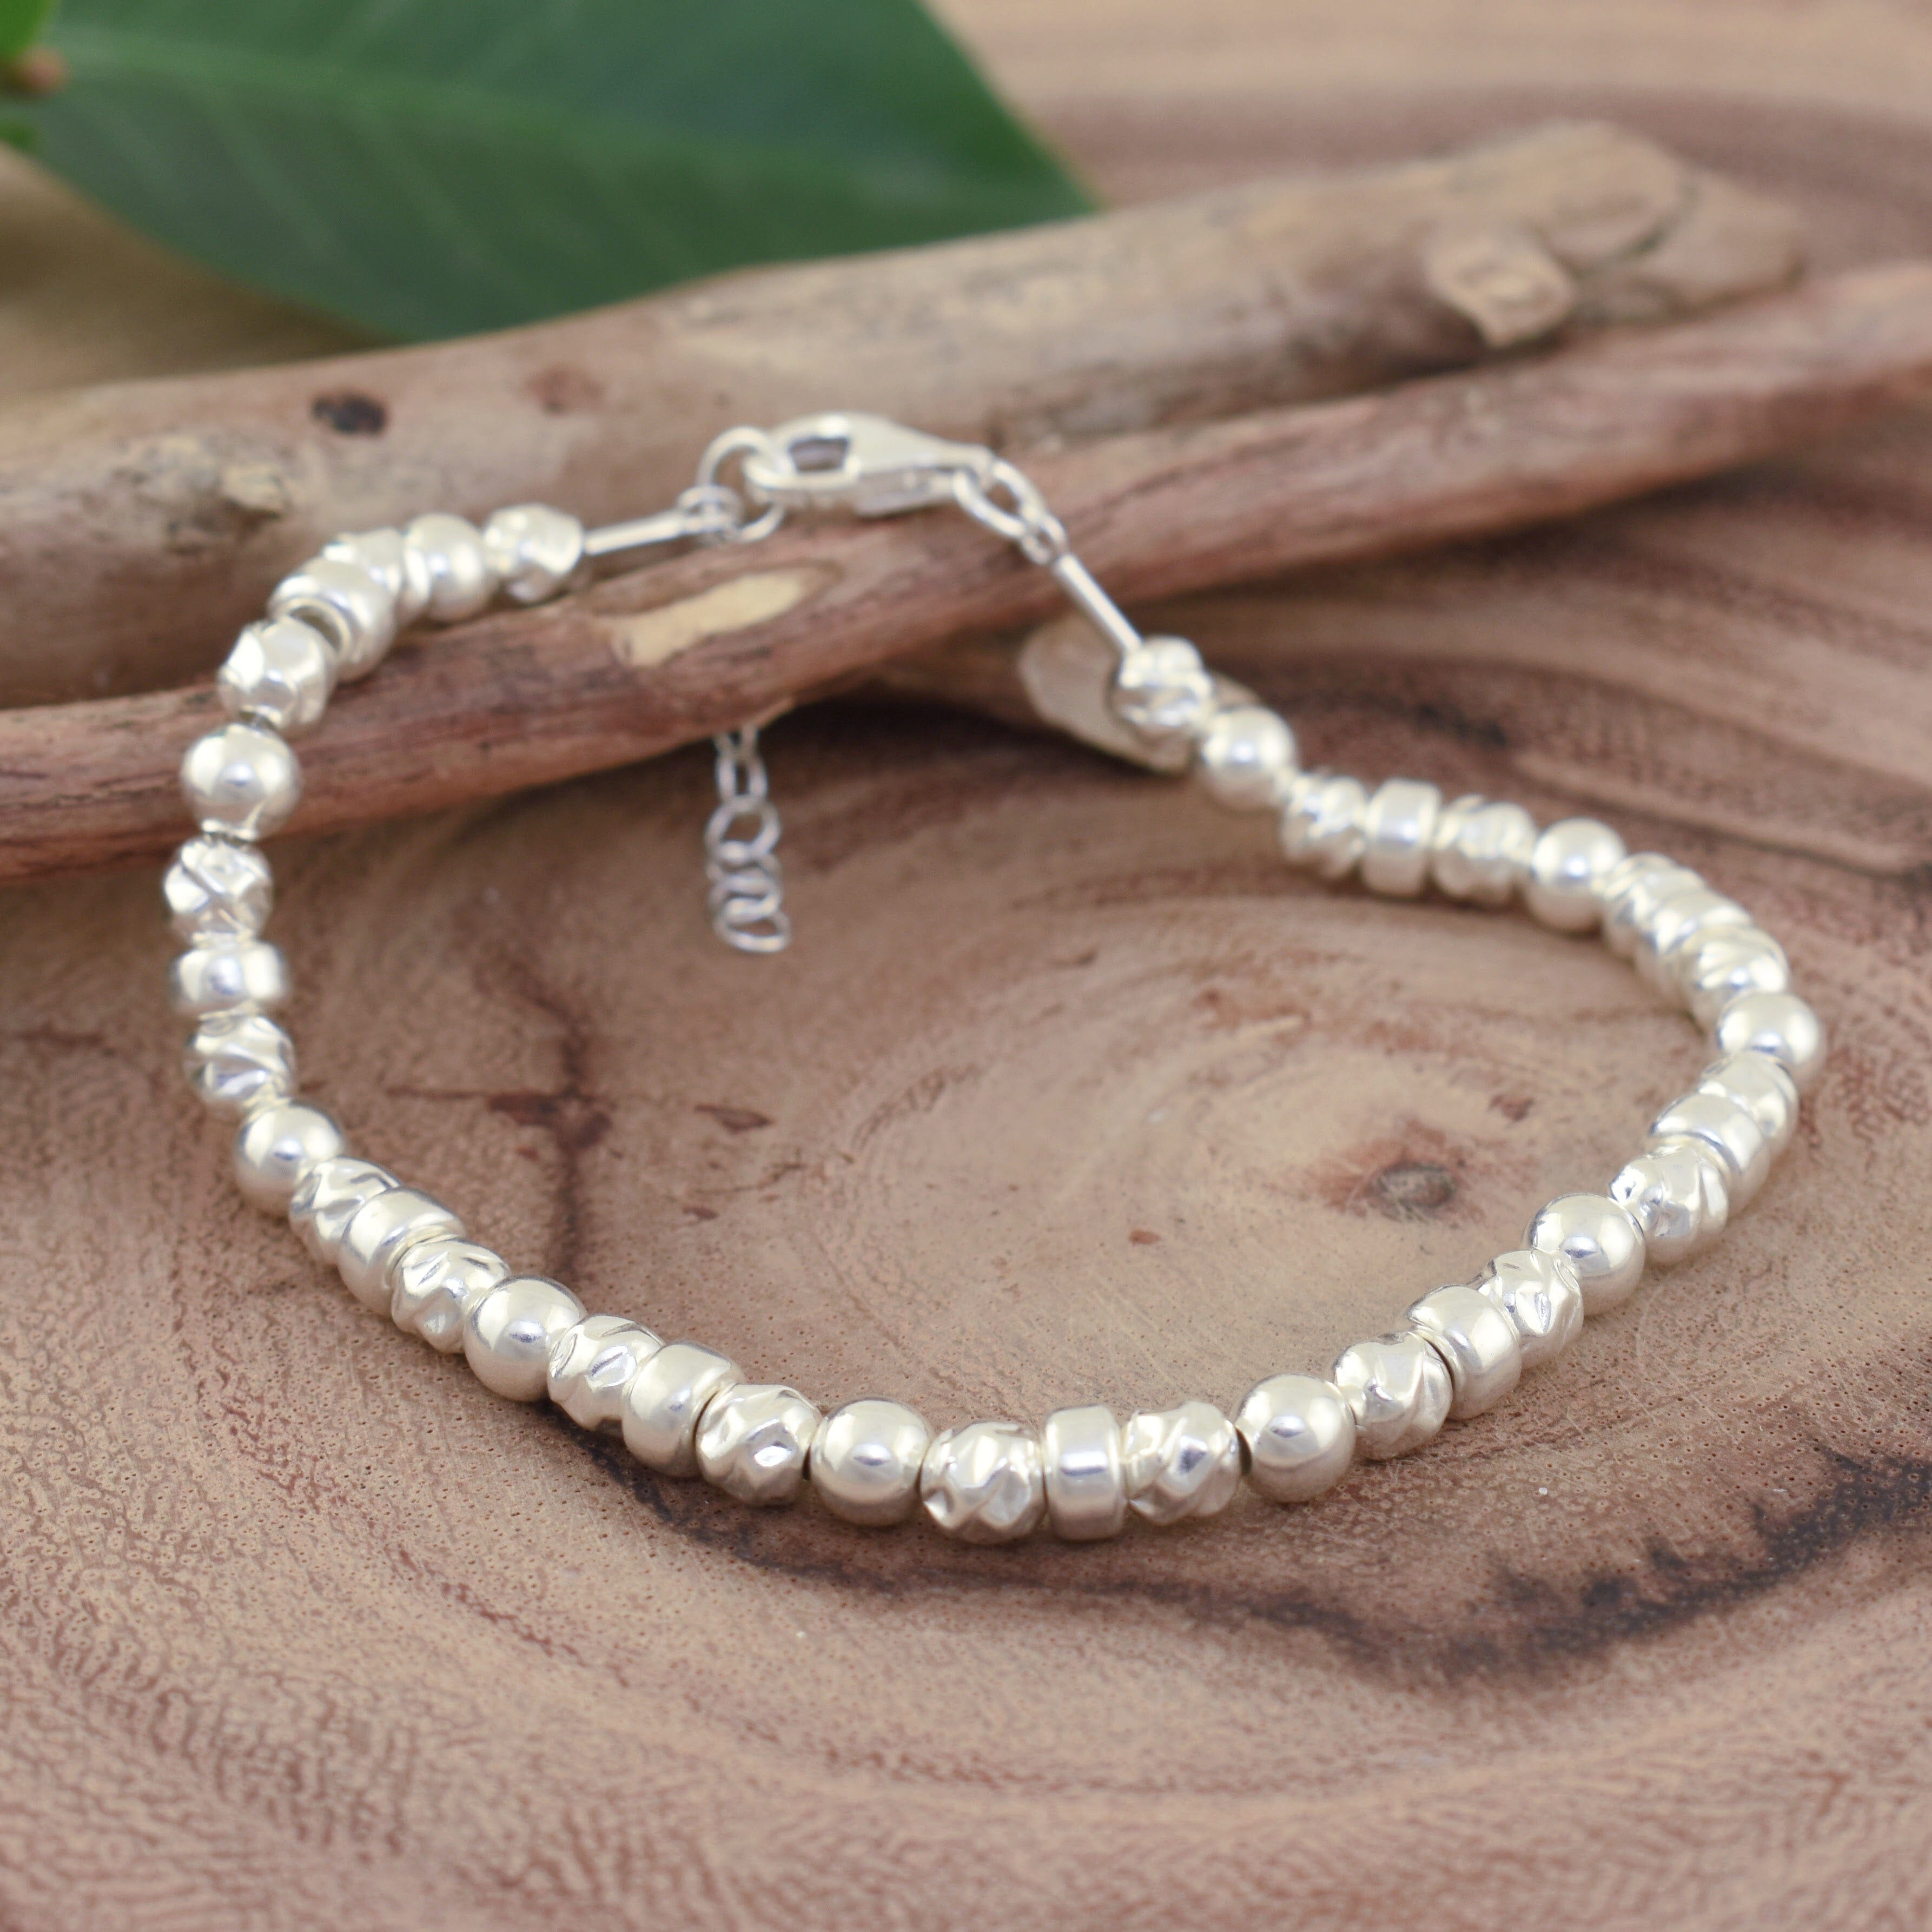 Sterling silver beaded bracelet with lobster clasp closure